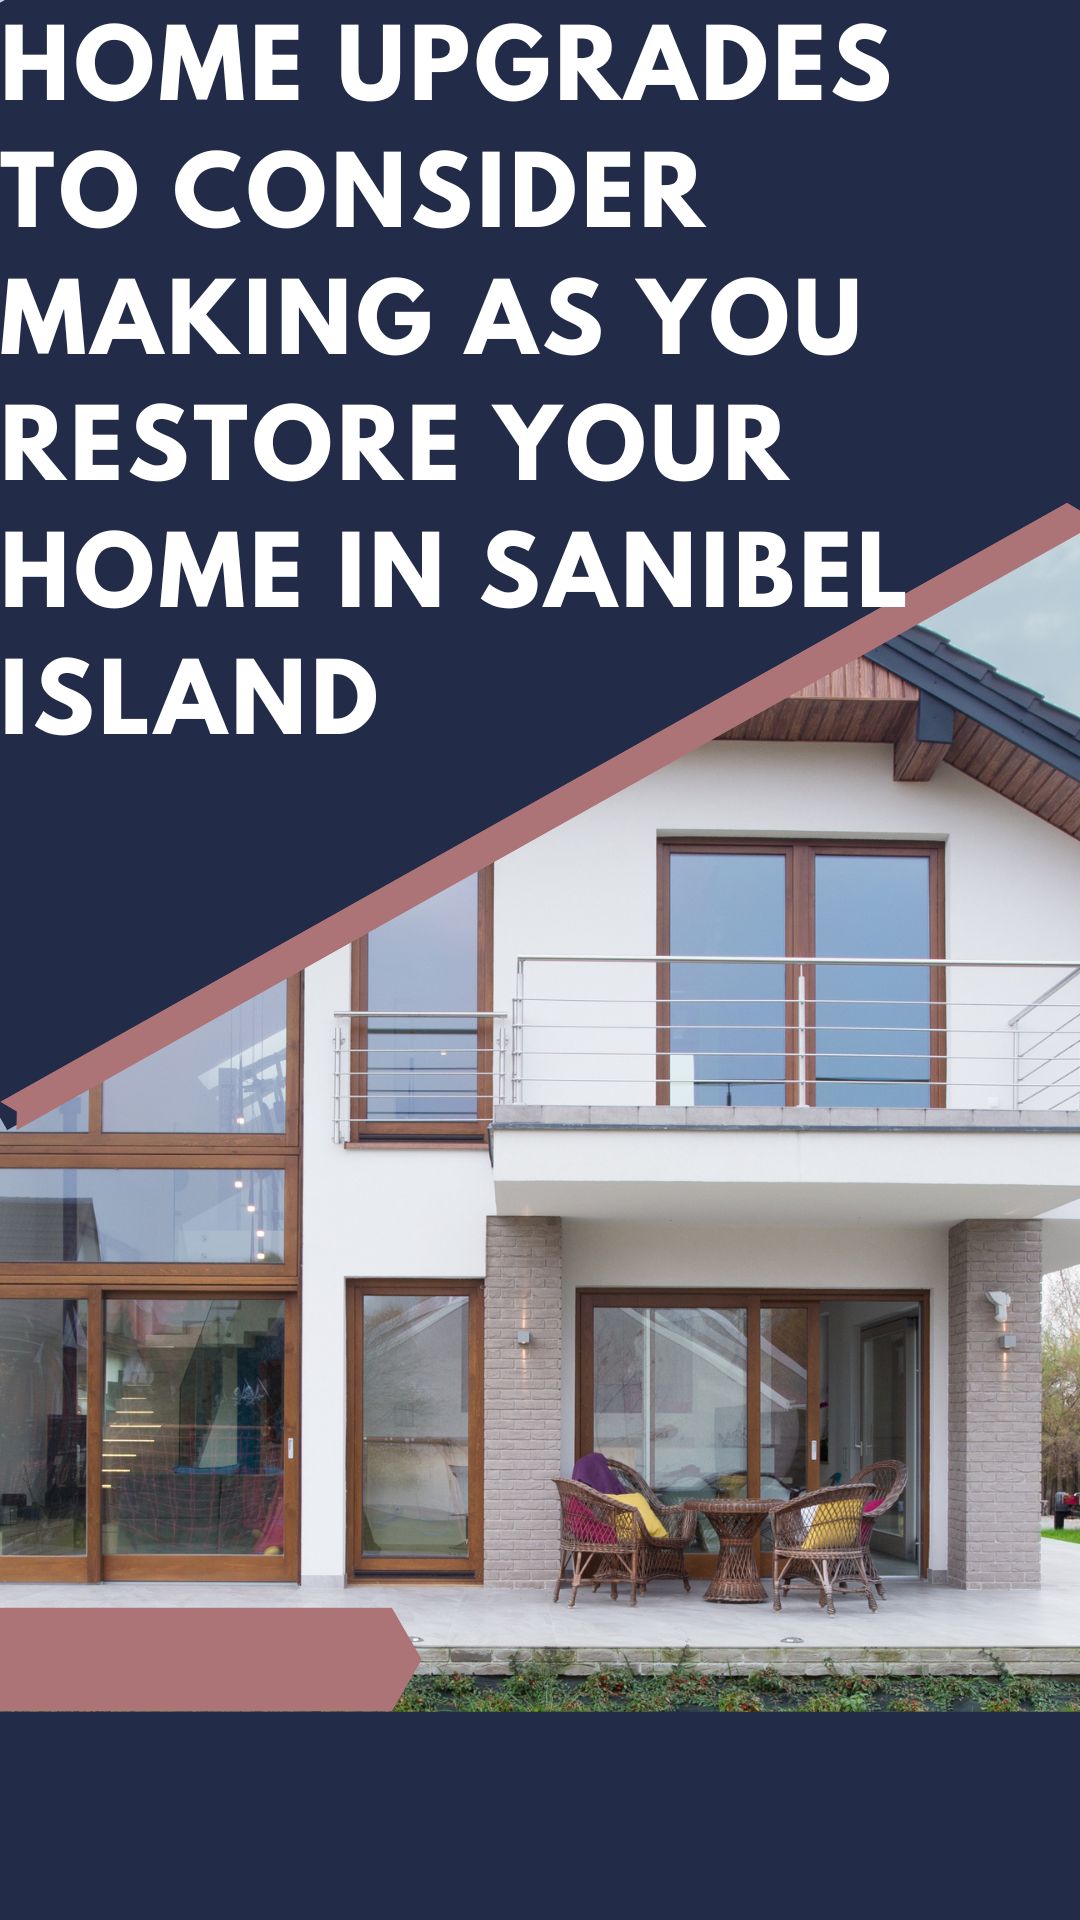 Home Upgrades to Consider Making as You Restore Your Home in Sanibel Island